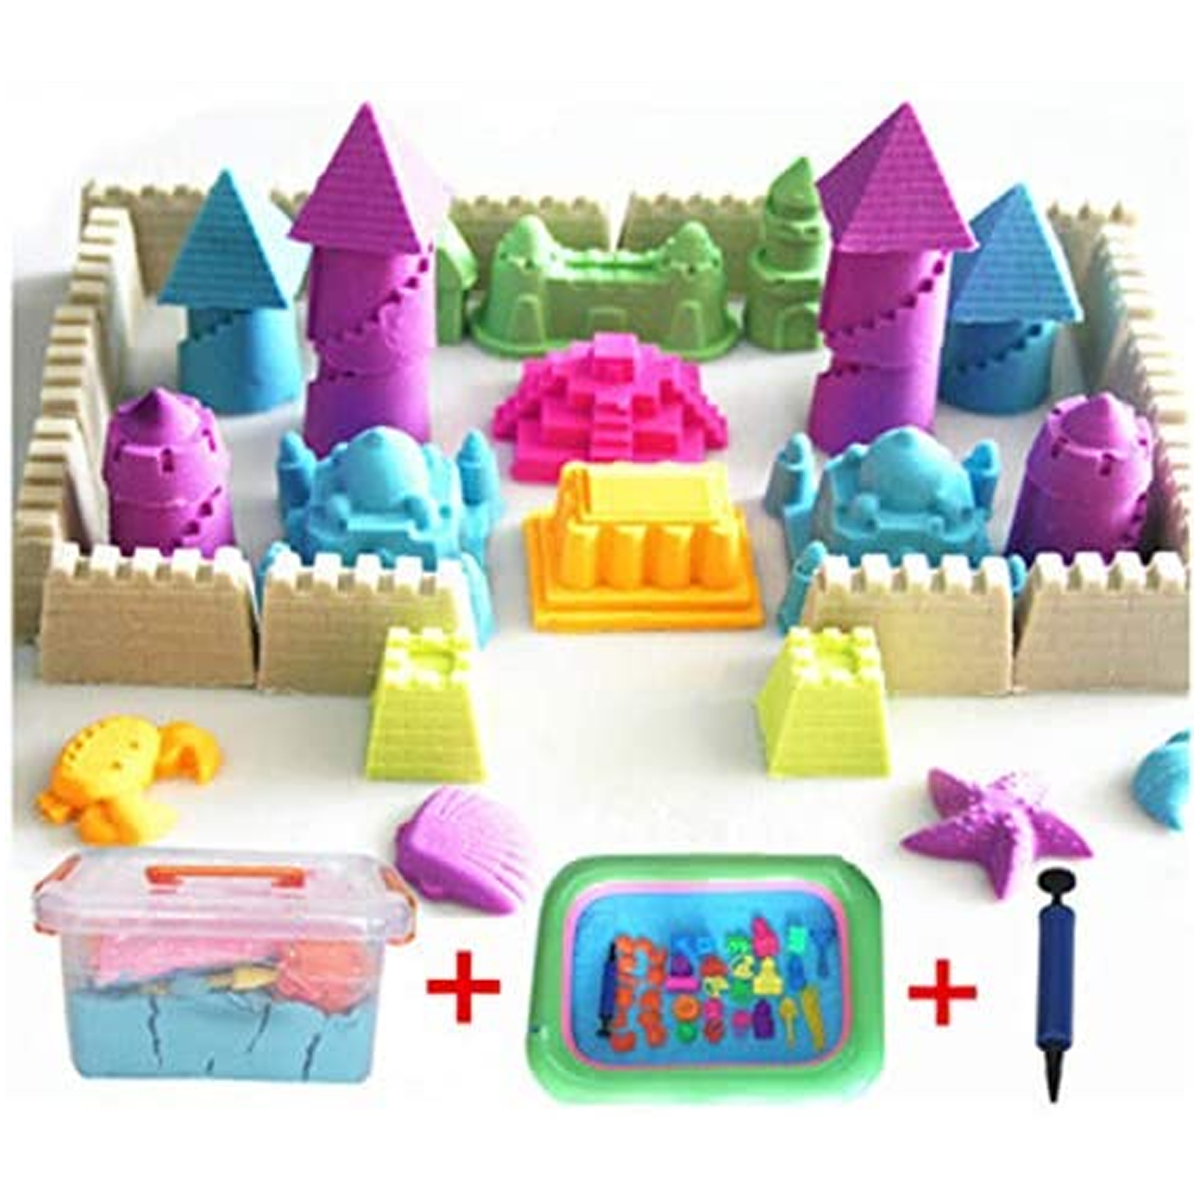 Magic Sand Toy Set with Modeling Tools (2 Kg) - Natural